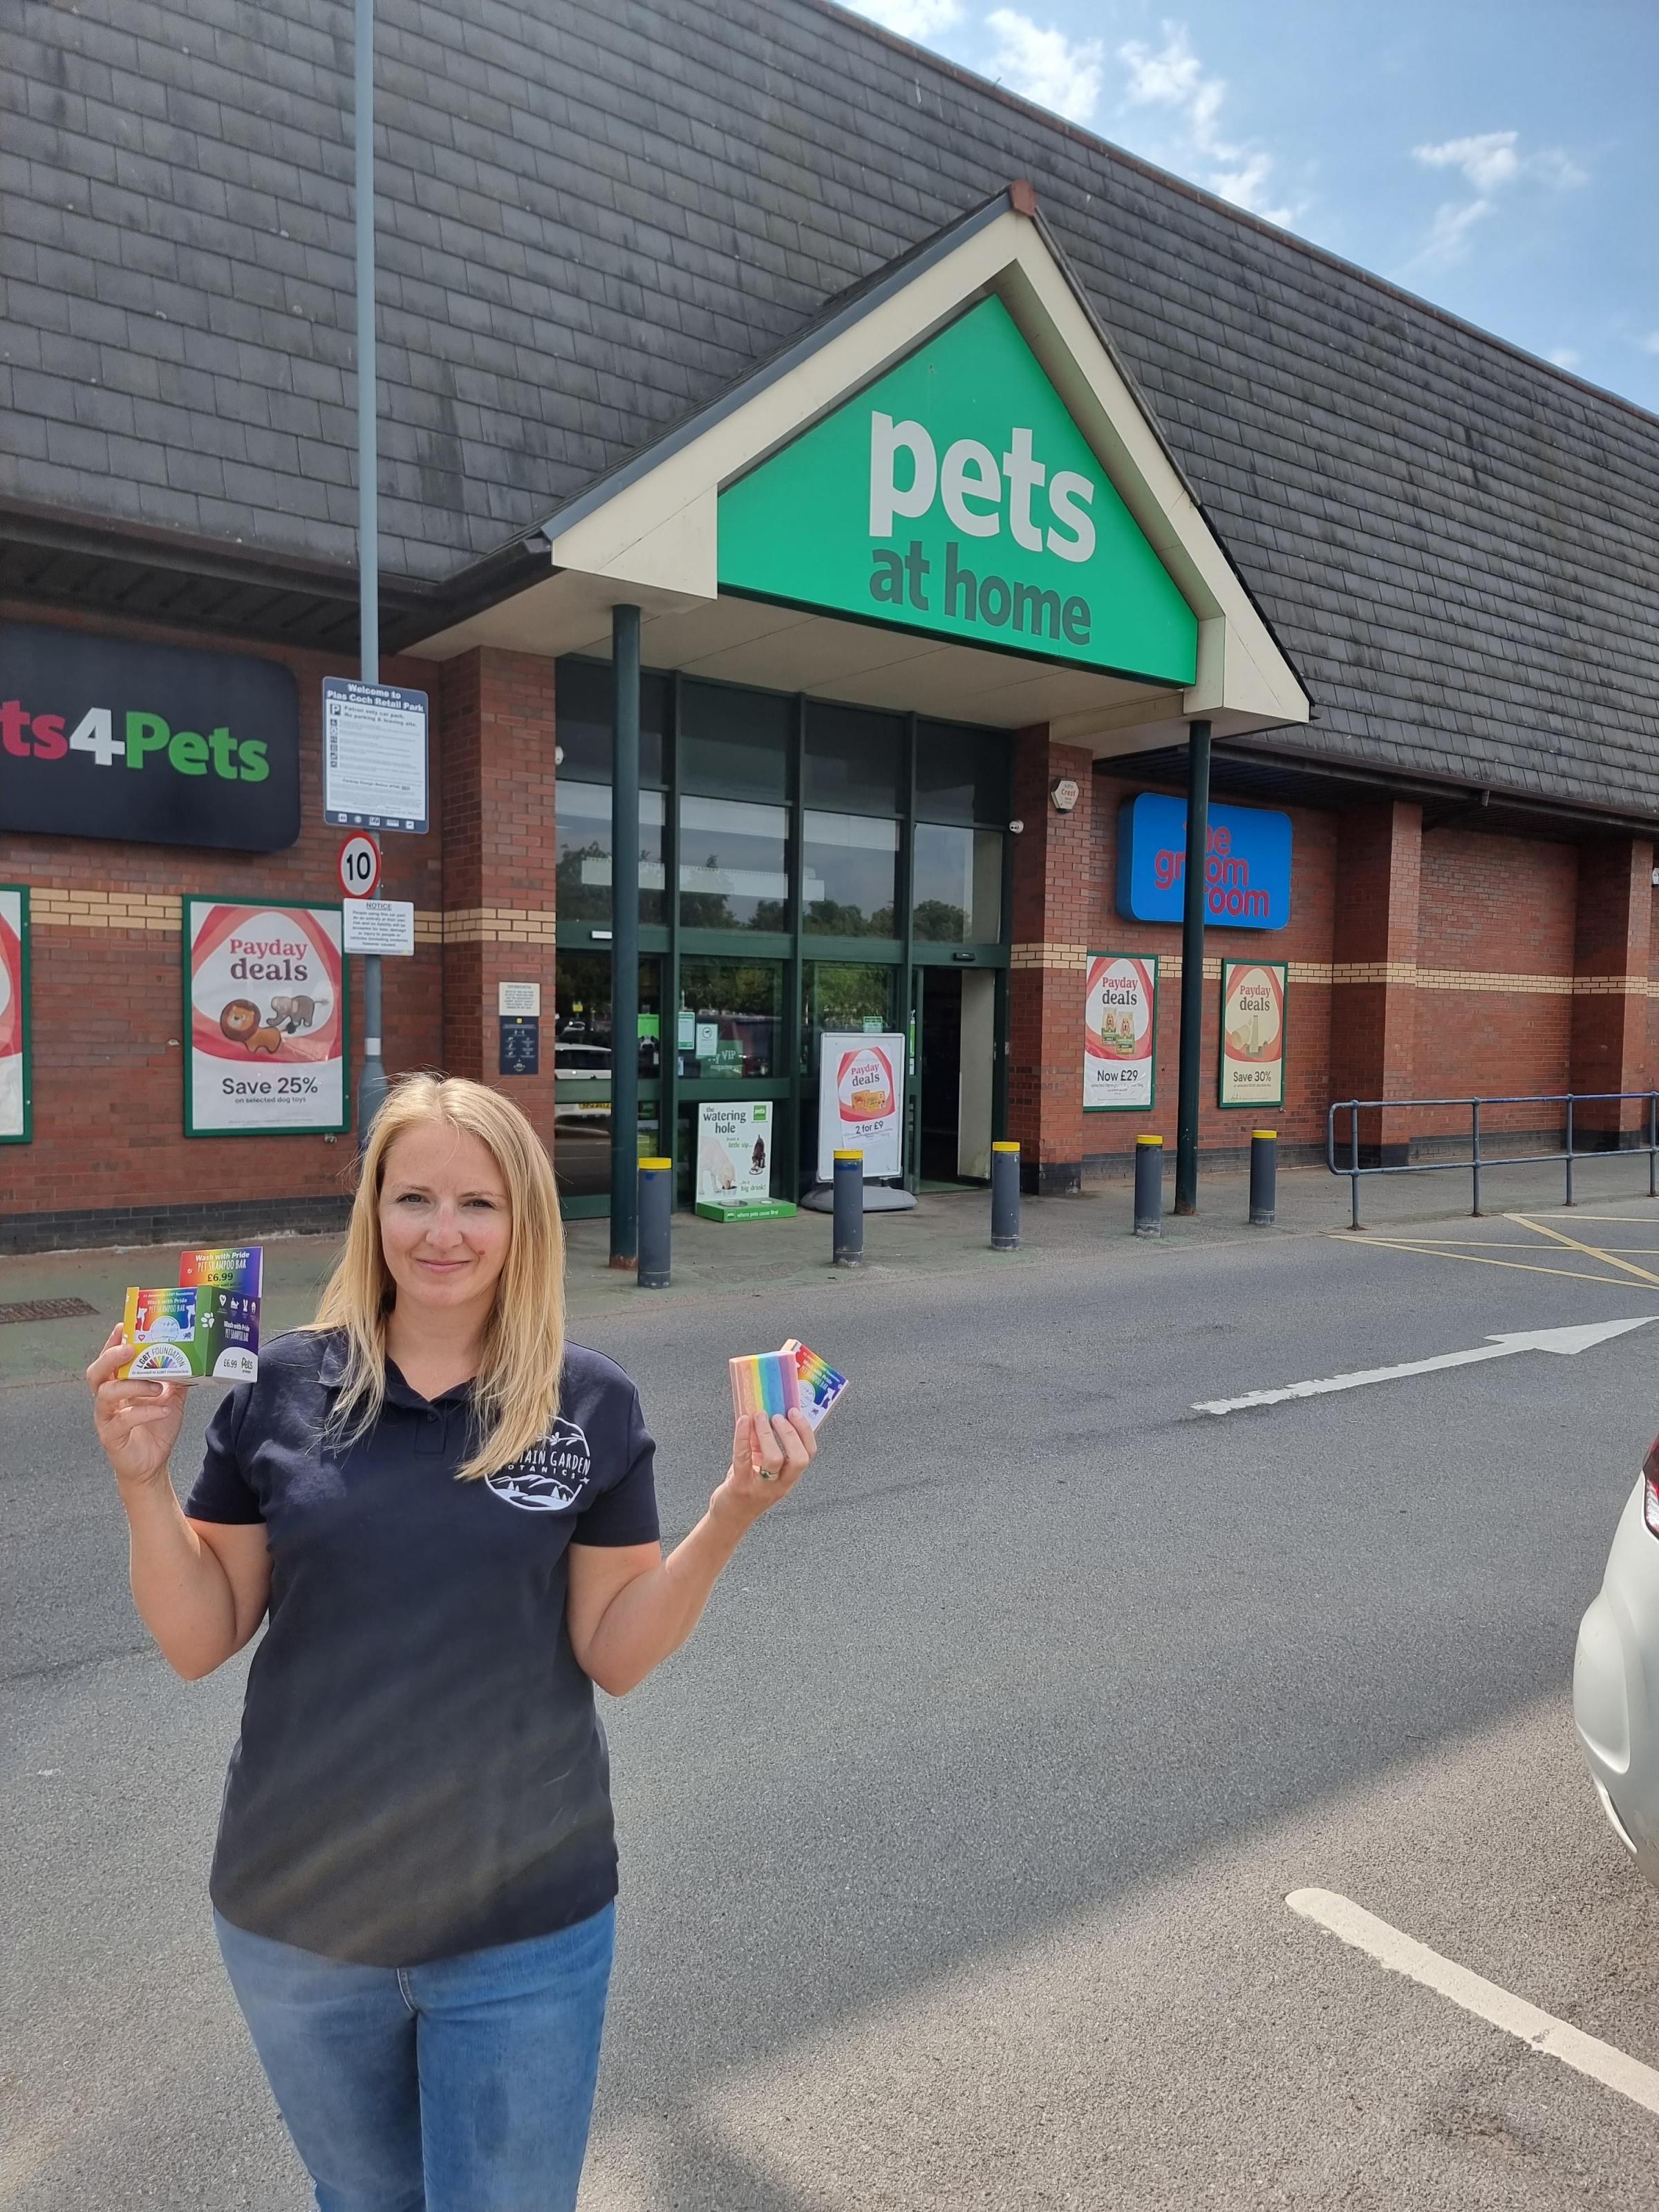 Mountain Garden Botanics Gillian Thomas-Jones, has secured a supply deal with Pets At Home nationwide.